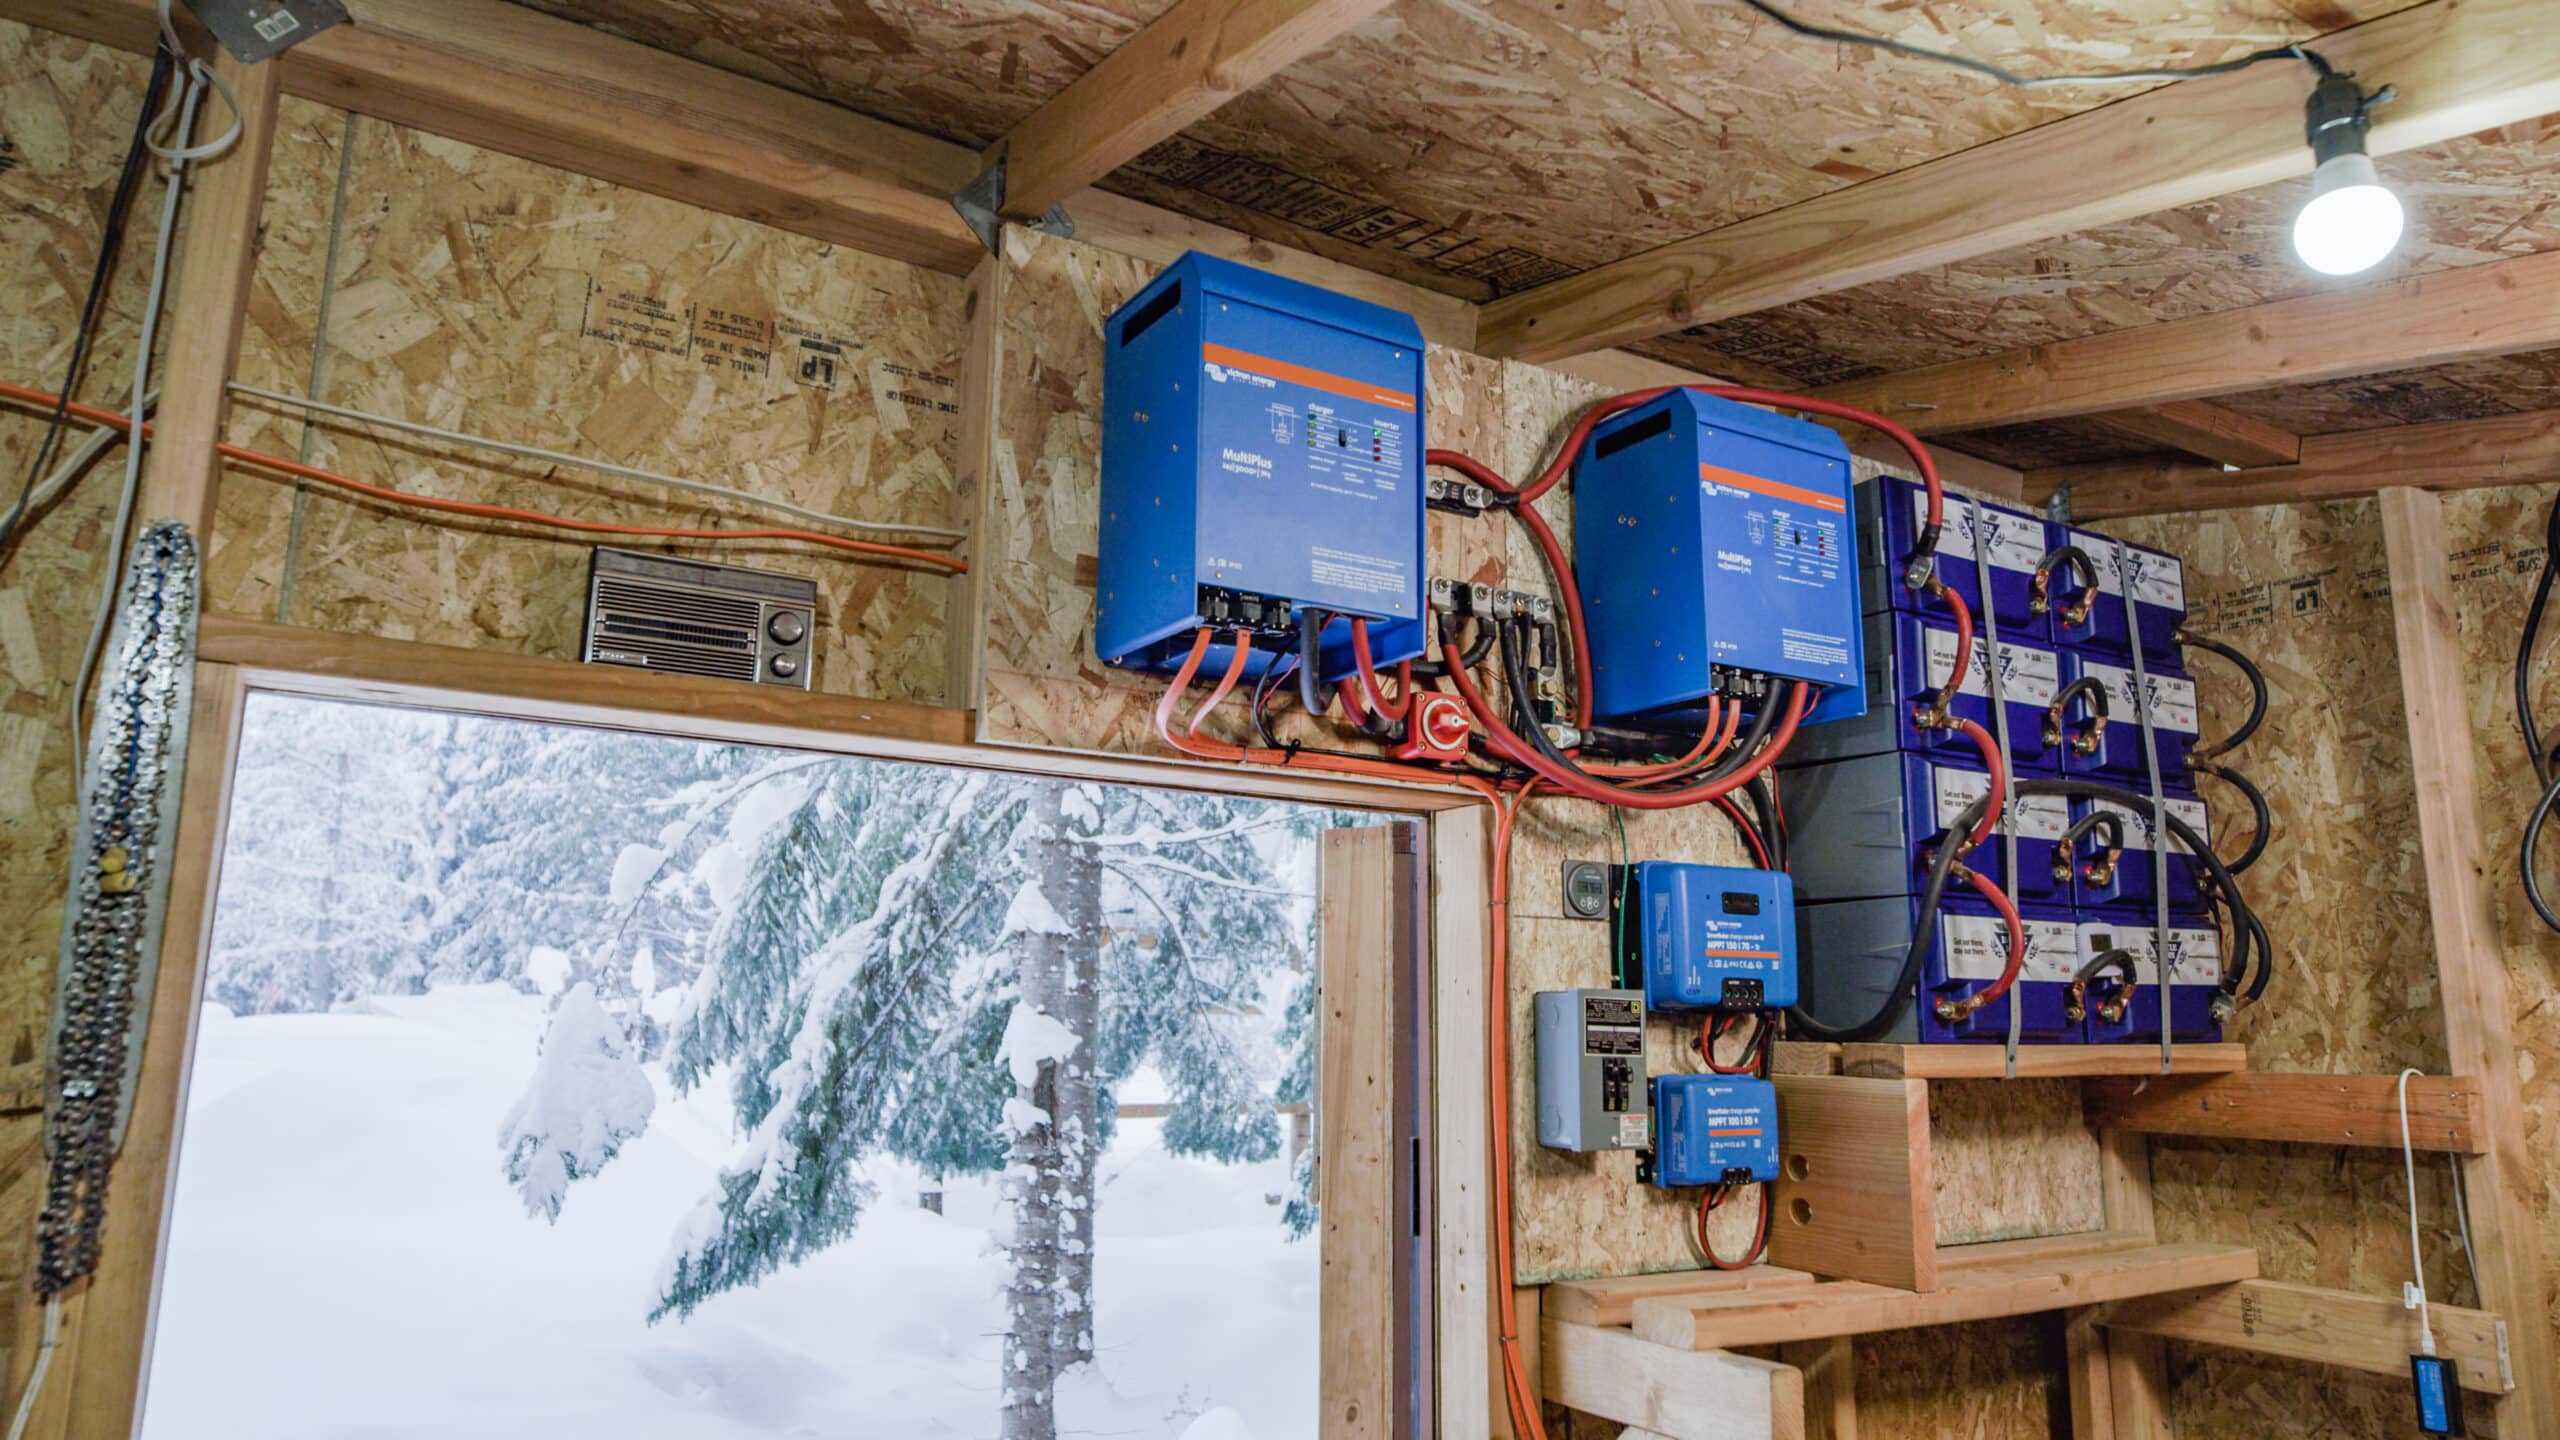 An off-grid battery storage system in mounted in an off-grid cabin